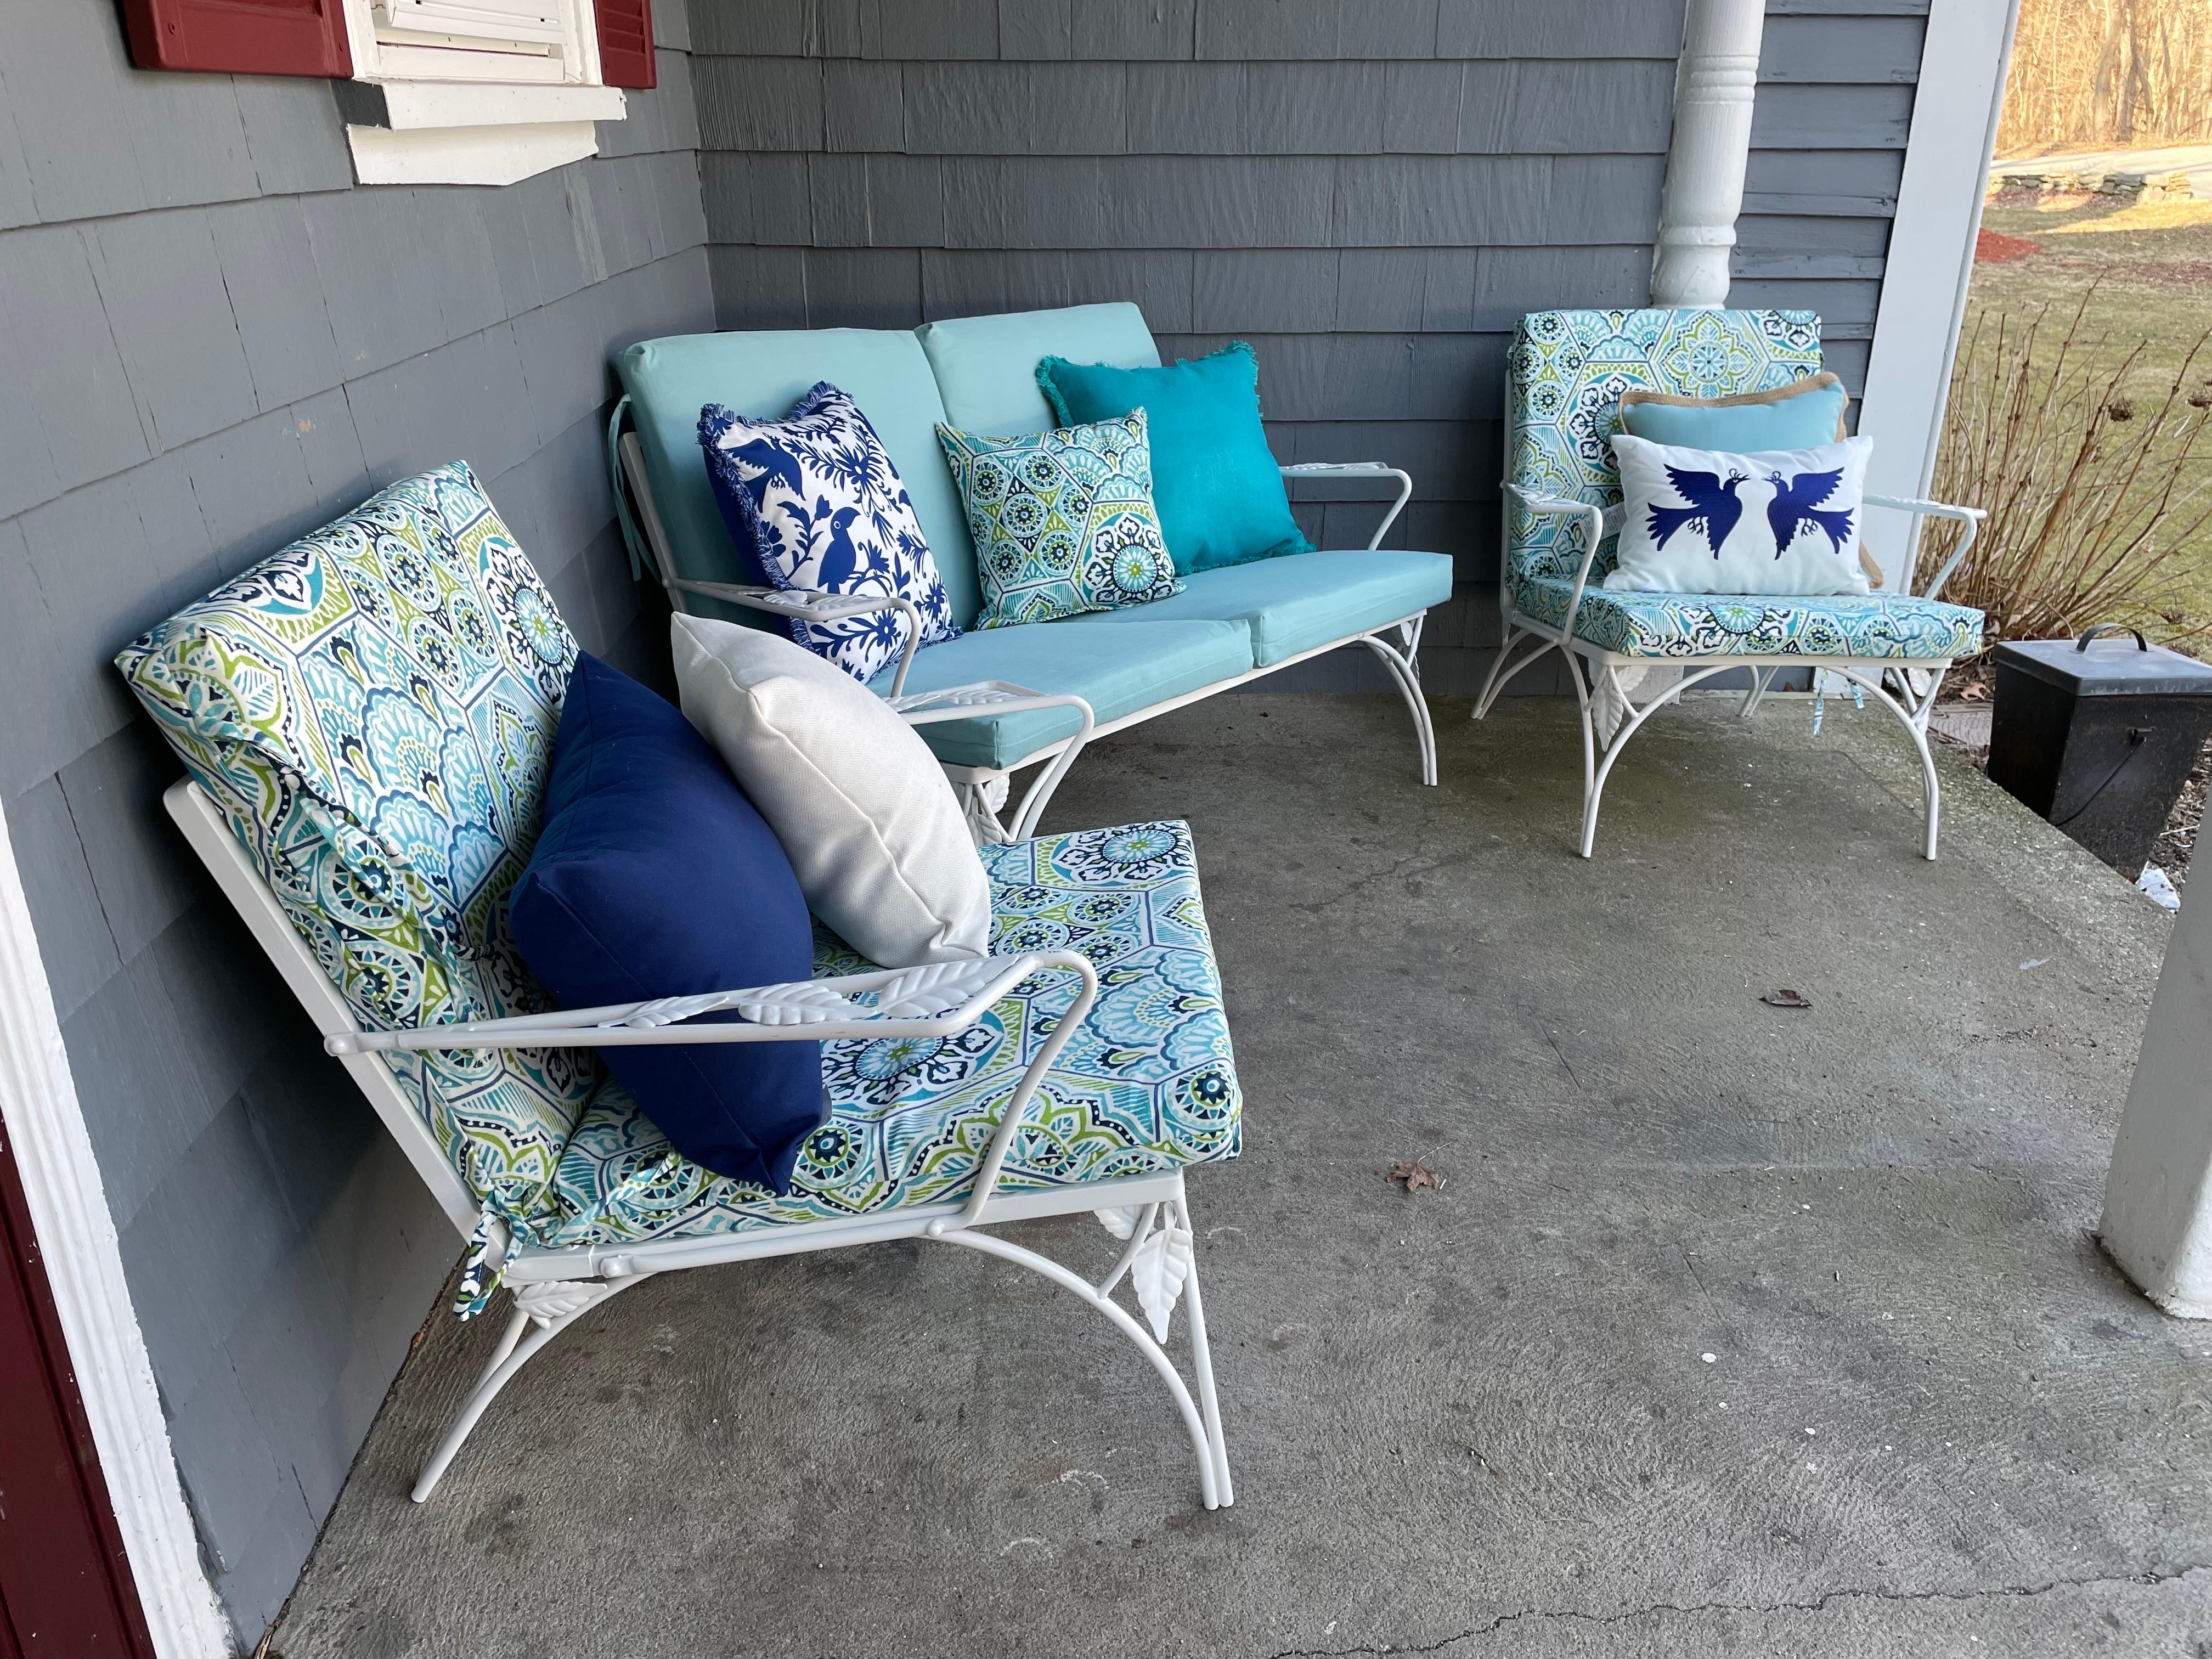 MCM Wrought Iron Outdoor Patio Furniture -A set

(1) 2 Person Loveseat Settee
(2) Arm Chairs 
(4) Pale Blue Outdoor Cushions
(6) Throw Pillows

A stylish set well appointed with a variety of relaxing blue hues to accommodate any pool, patio, garden,